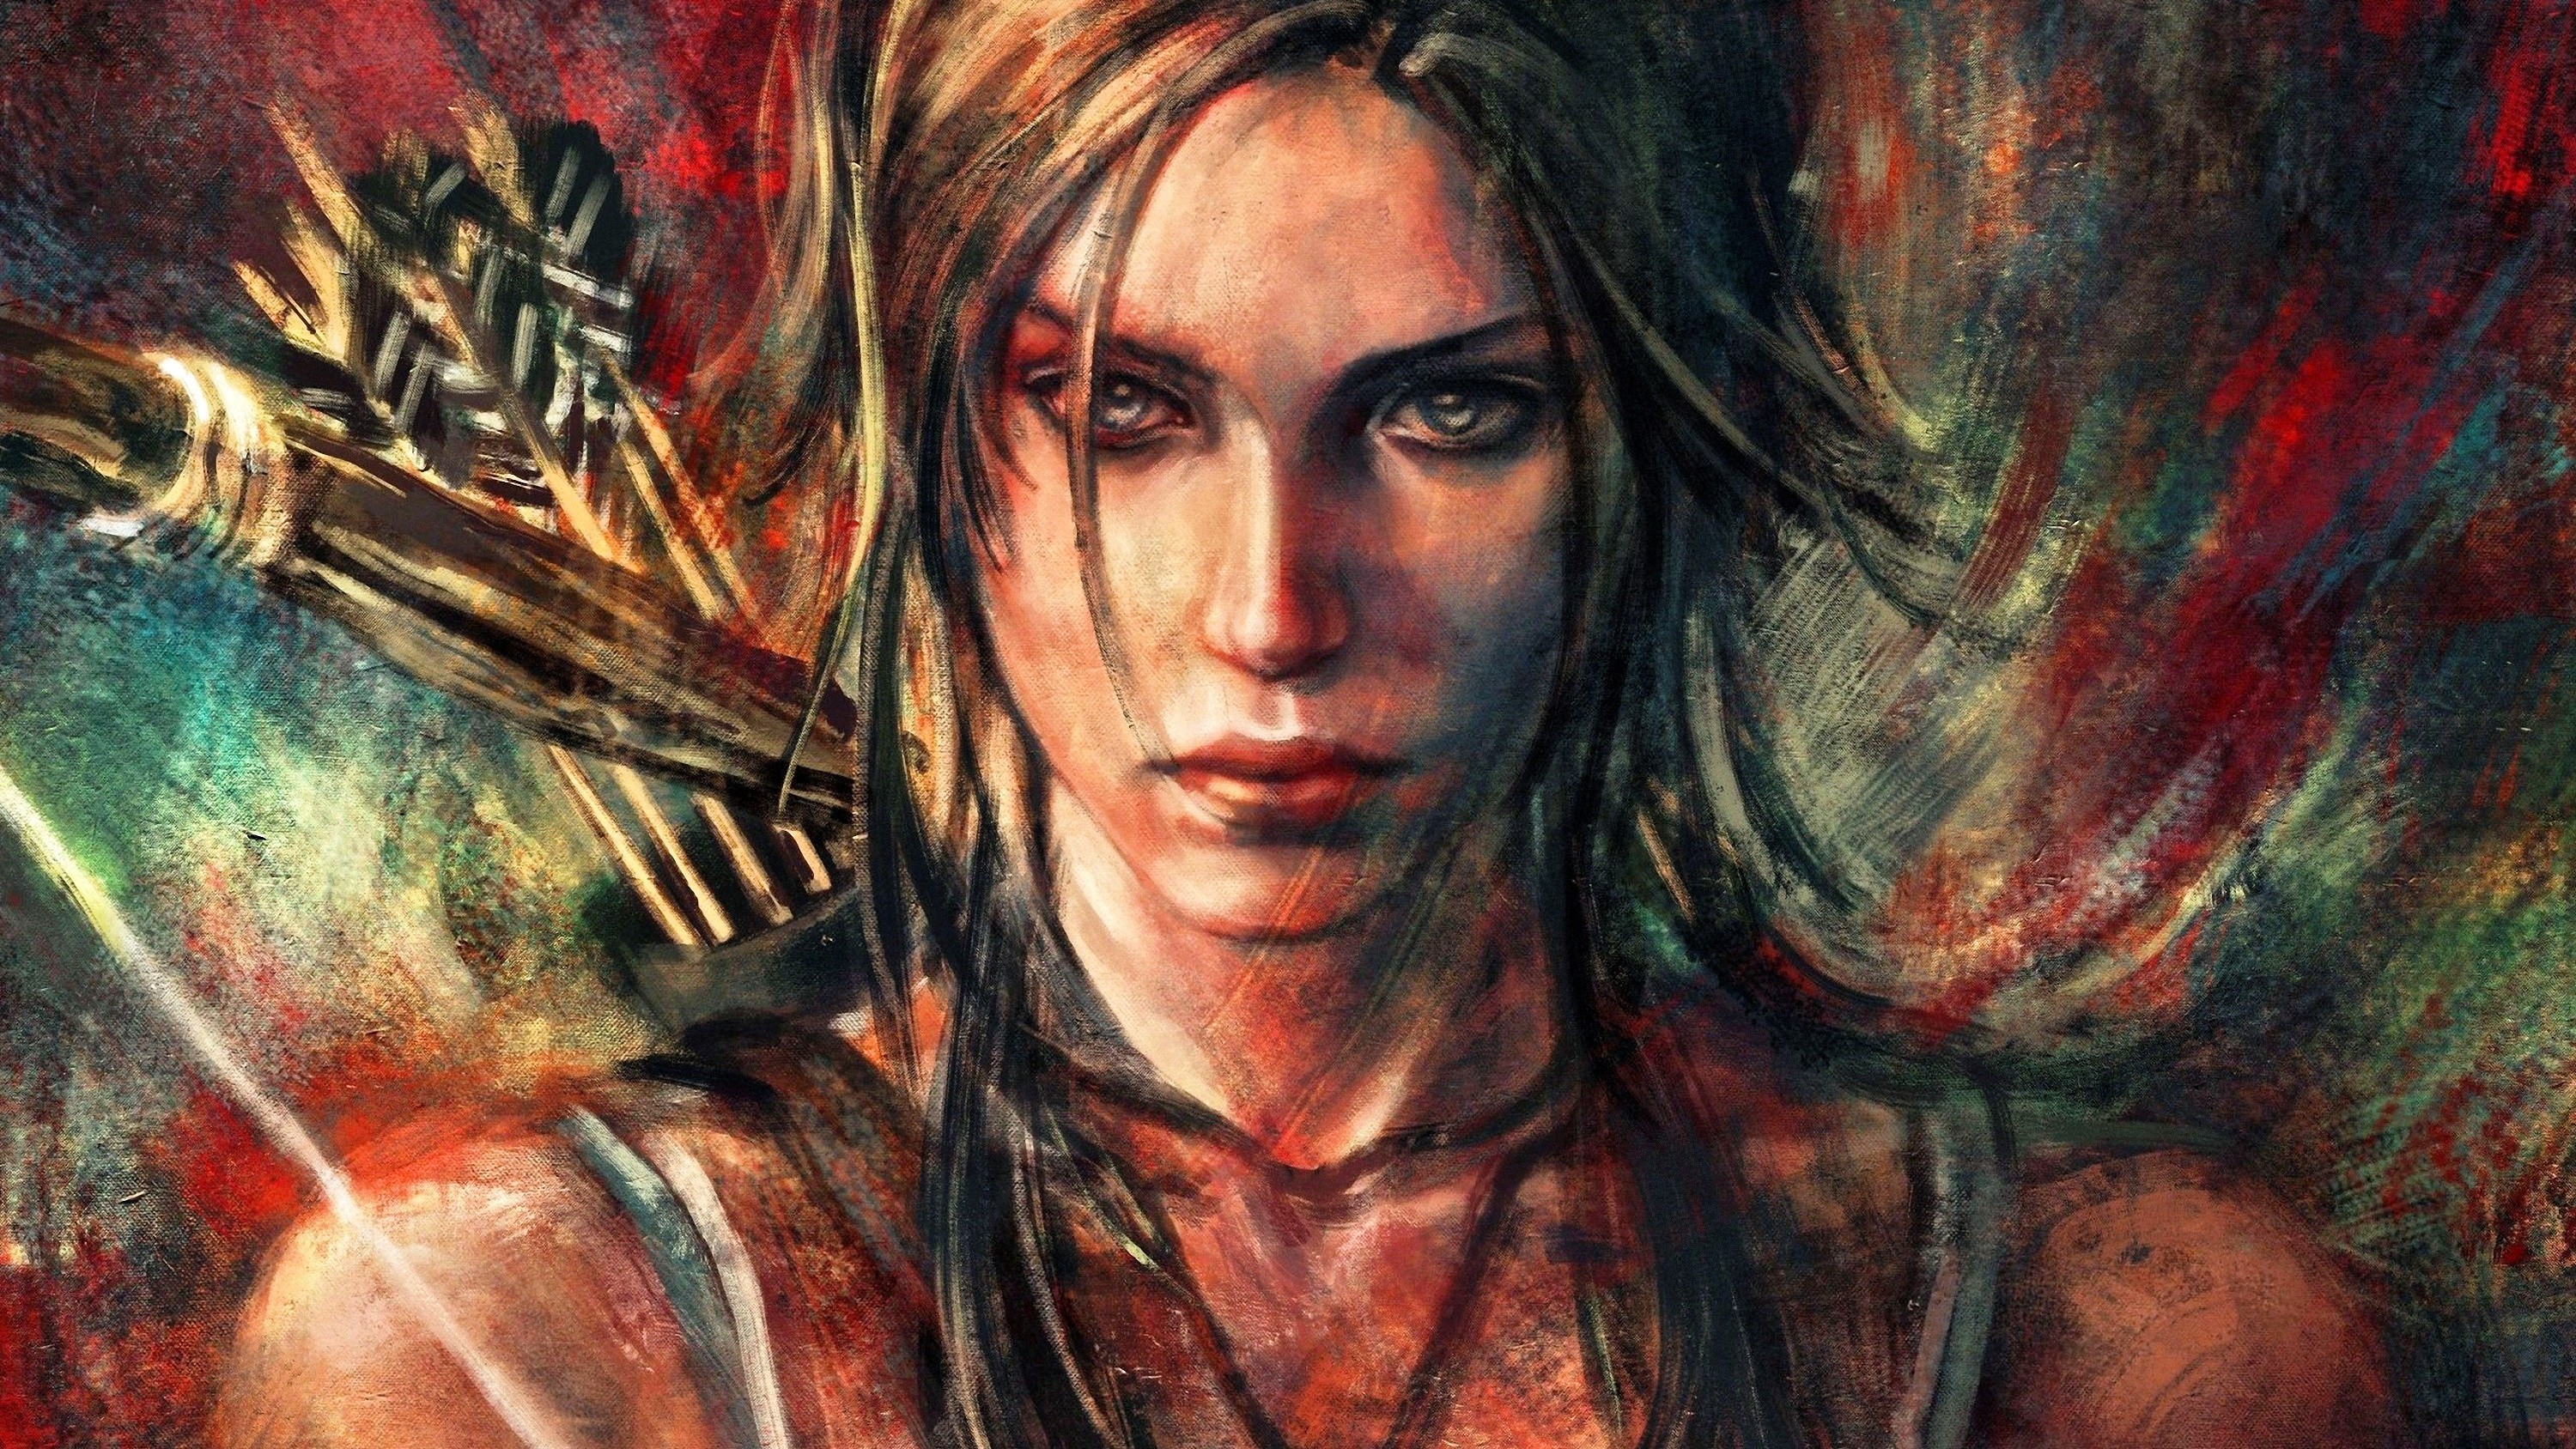 Tomb Raider Video Game Sequel Revealed at E3 [Video 